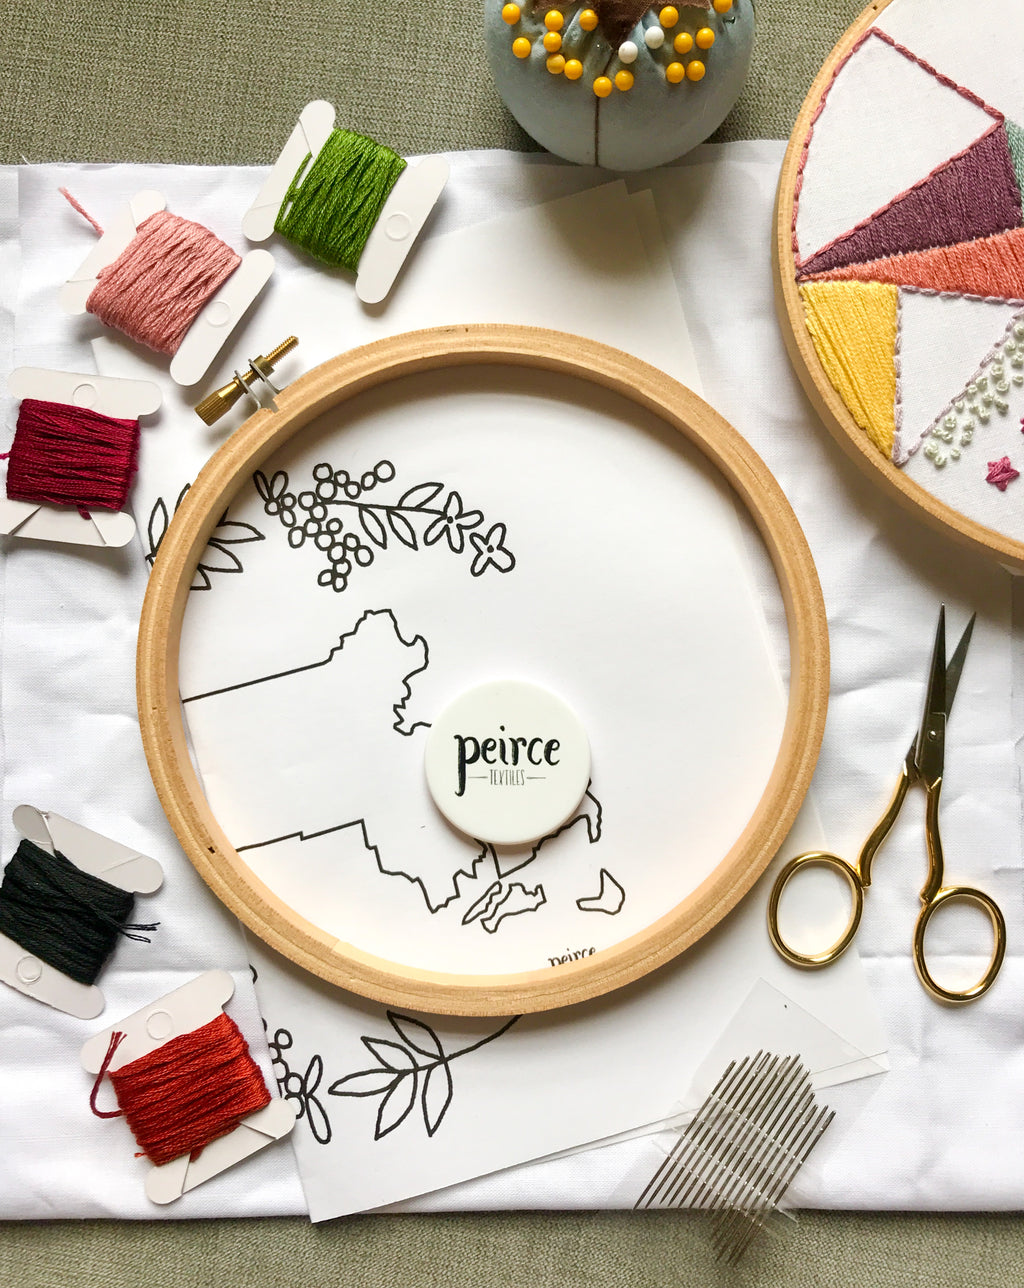 Embroidery kit with embroidery hoop, pattern, embroidery floss of varying colors, and embroidery needles